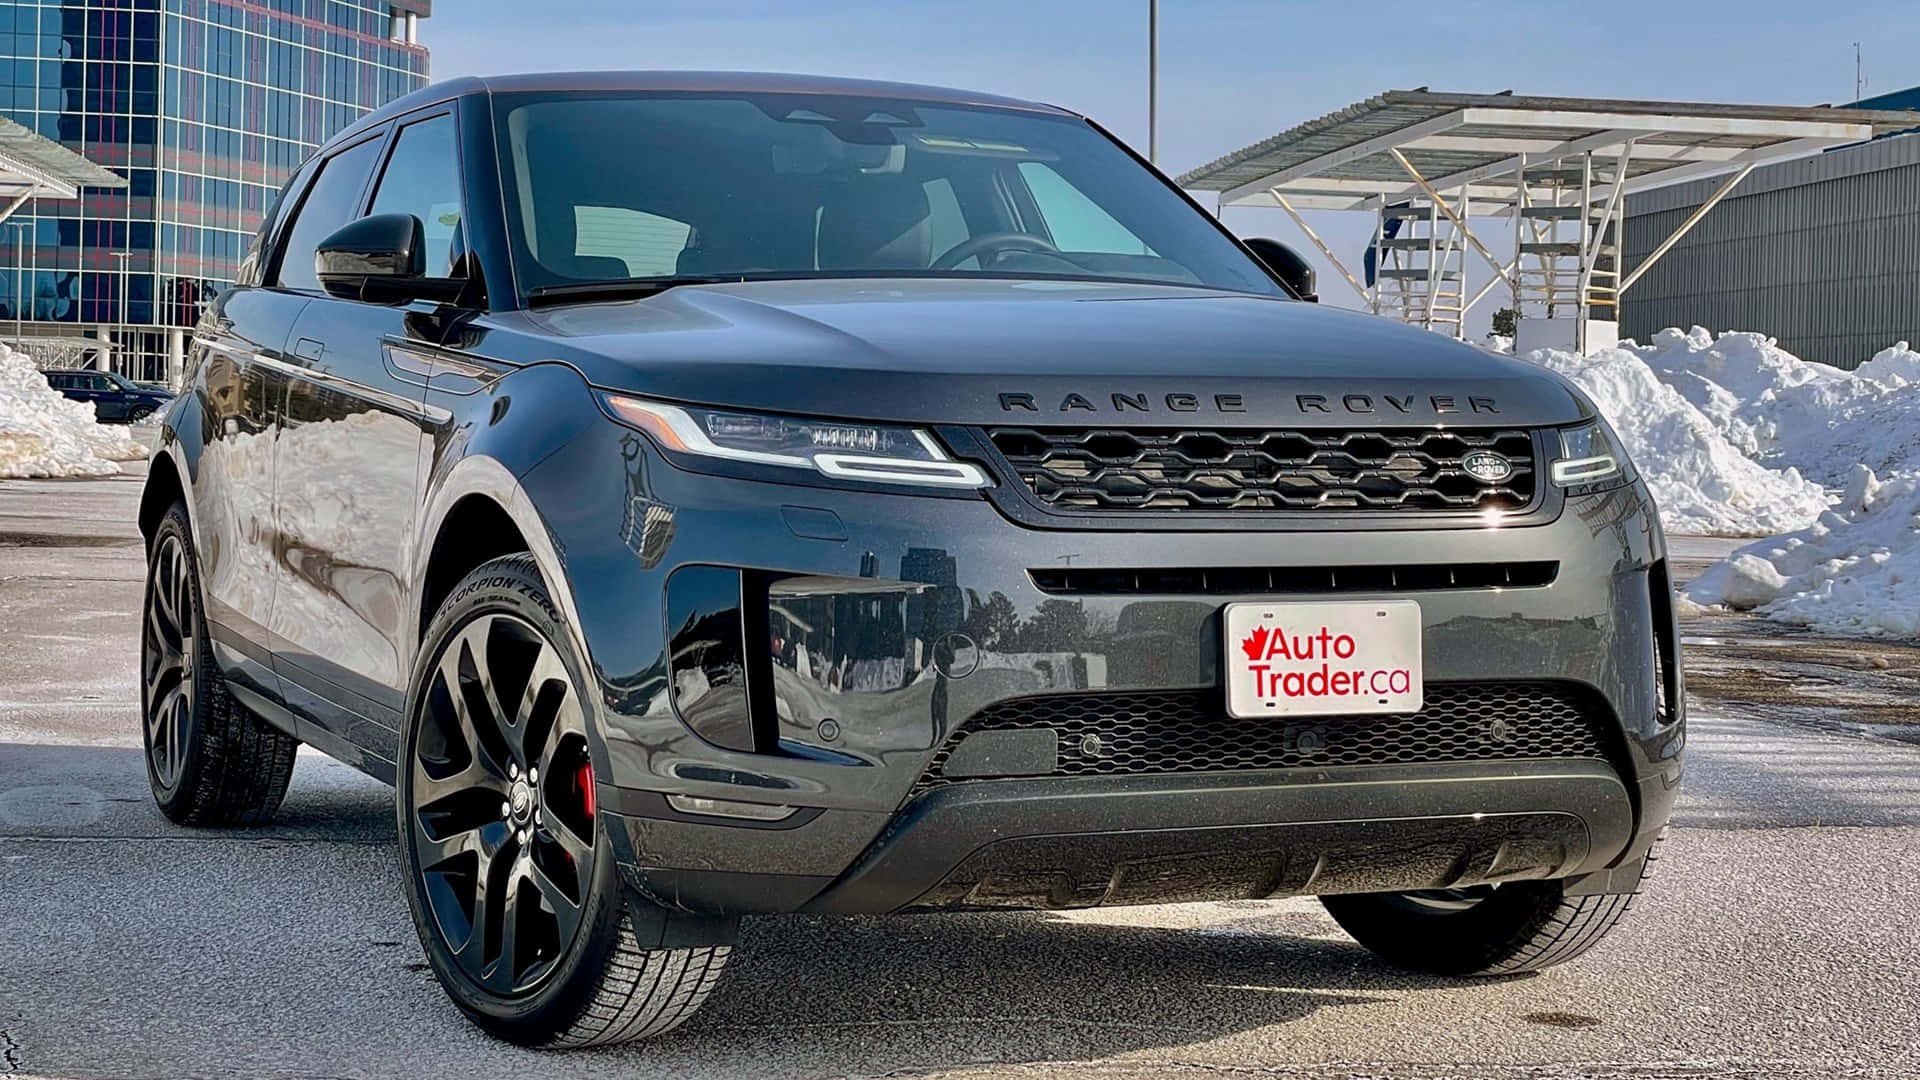 The 2019 Land Rover Evoque Is Parked In Front Of A Building